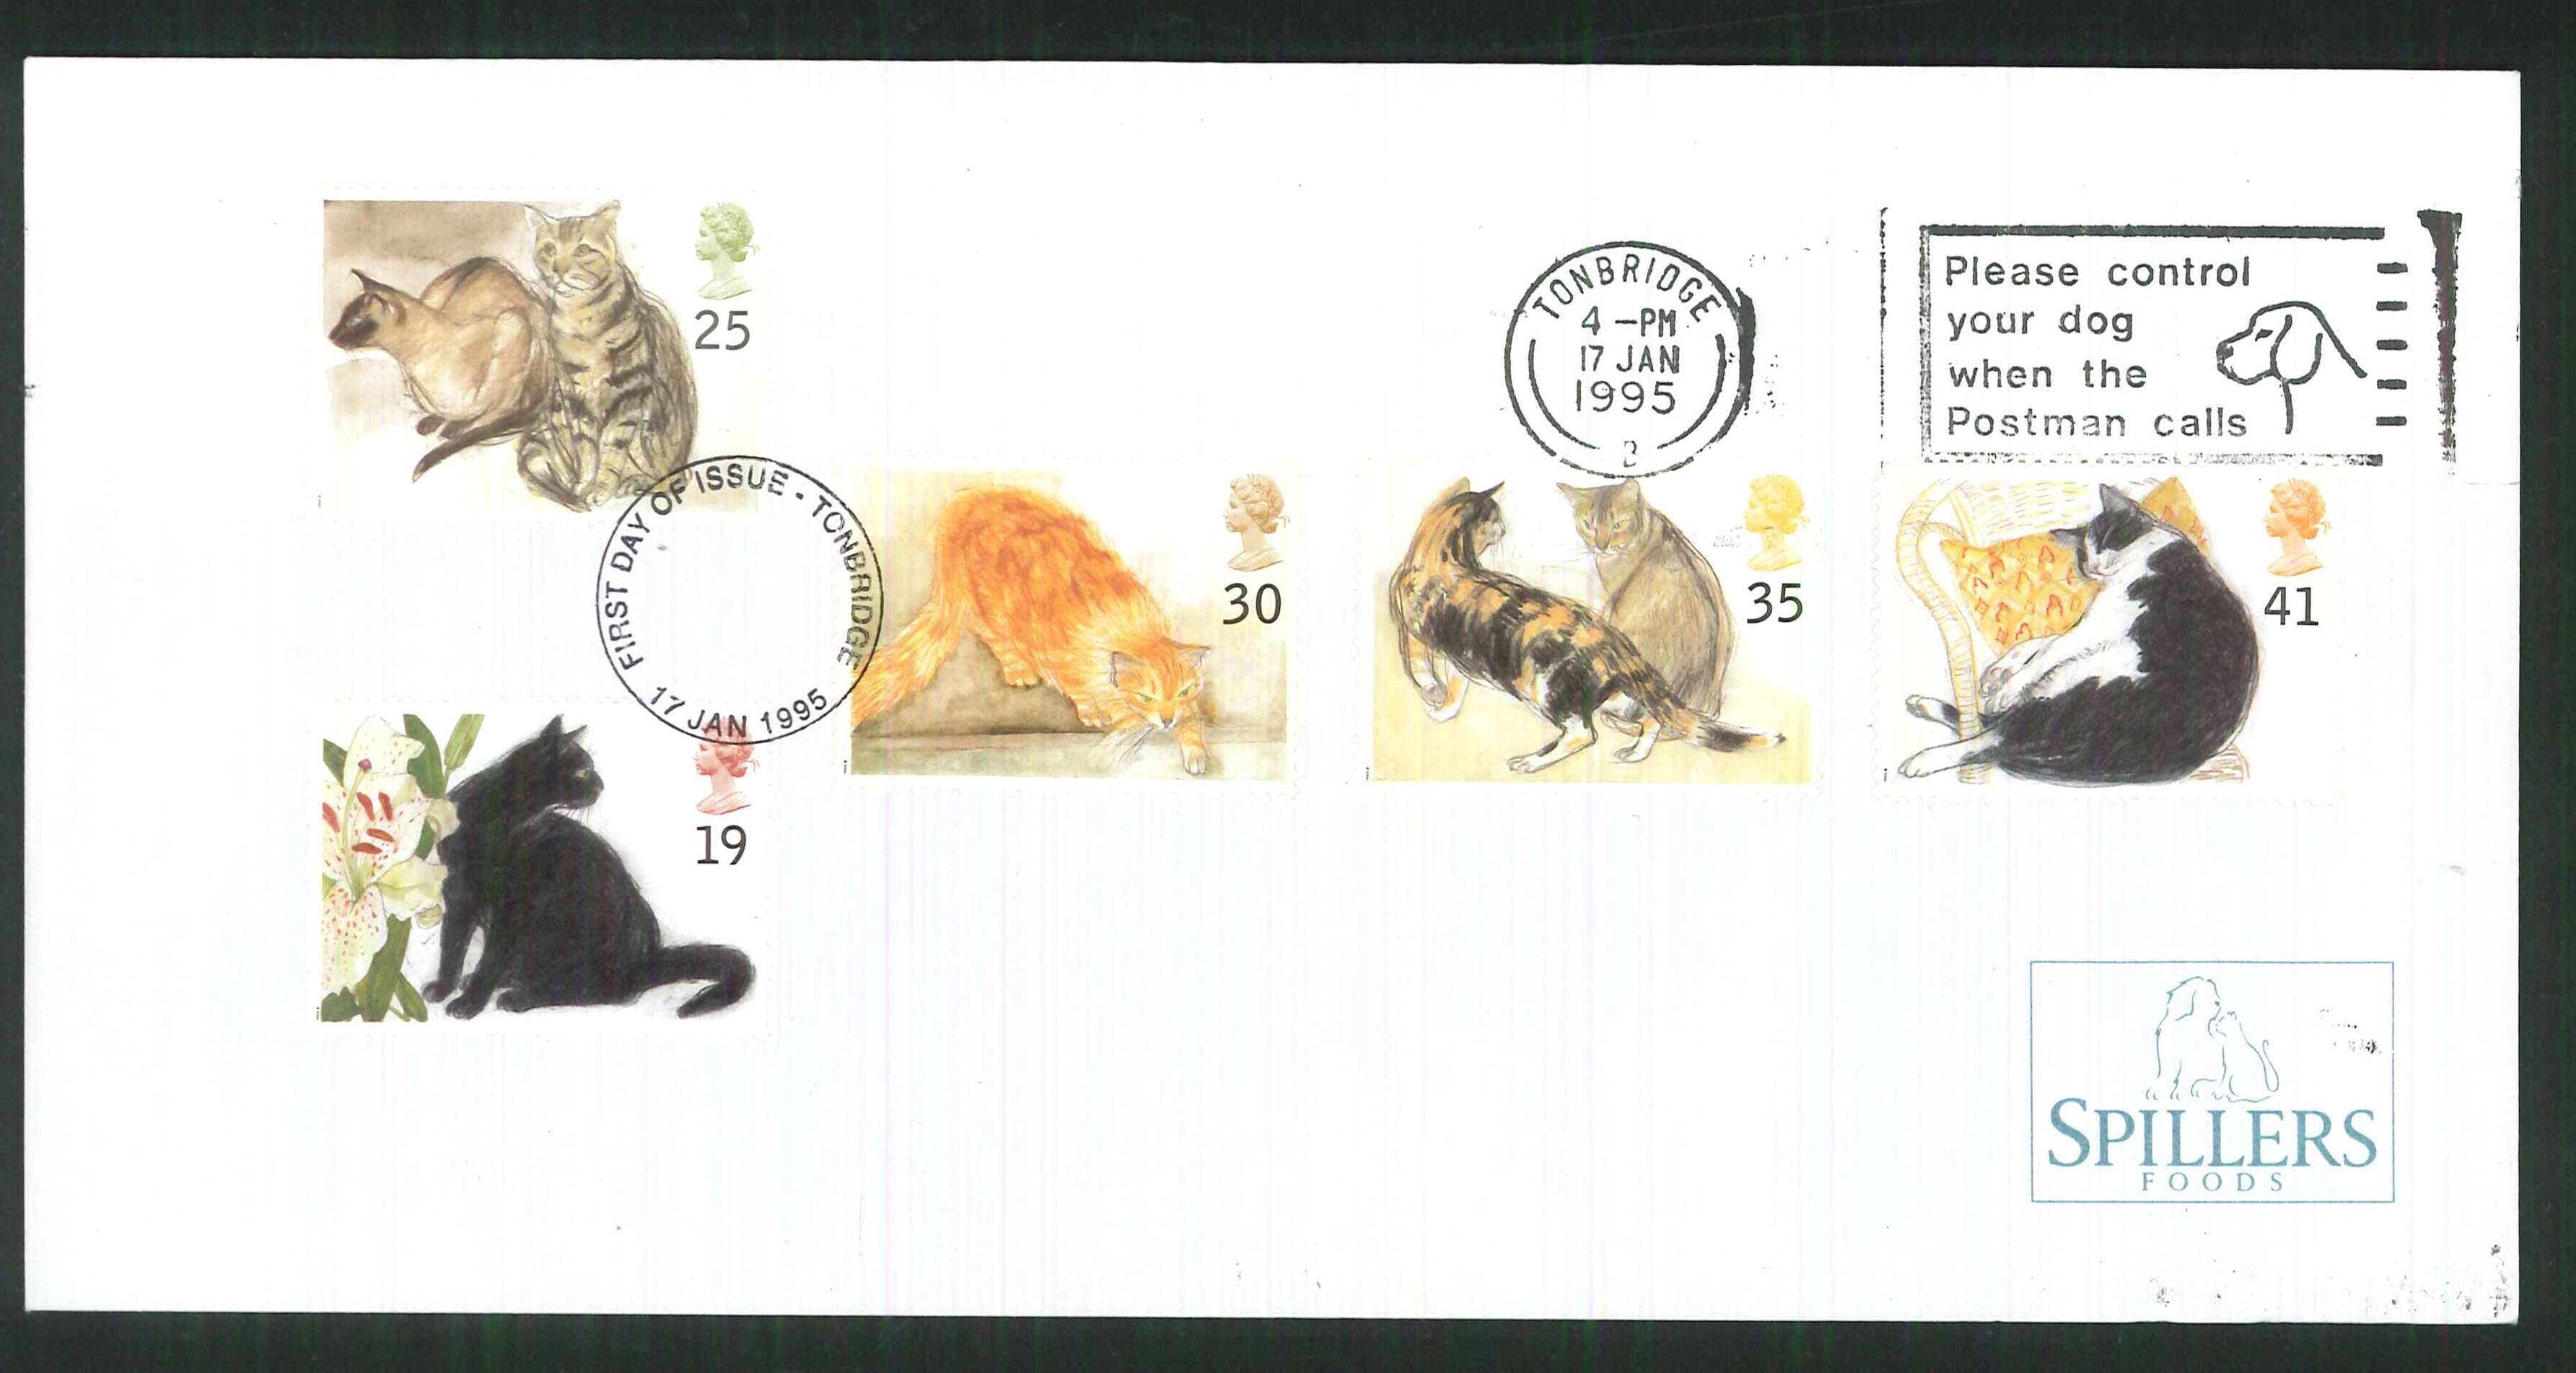 1995 - Cats First Day Cover - Control your Dog Slogan Postmark